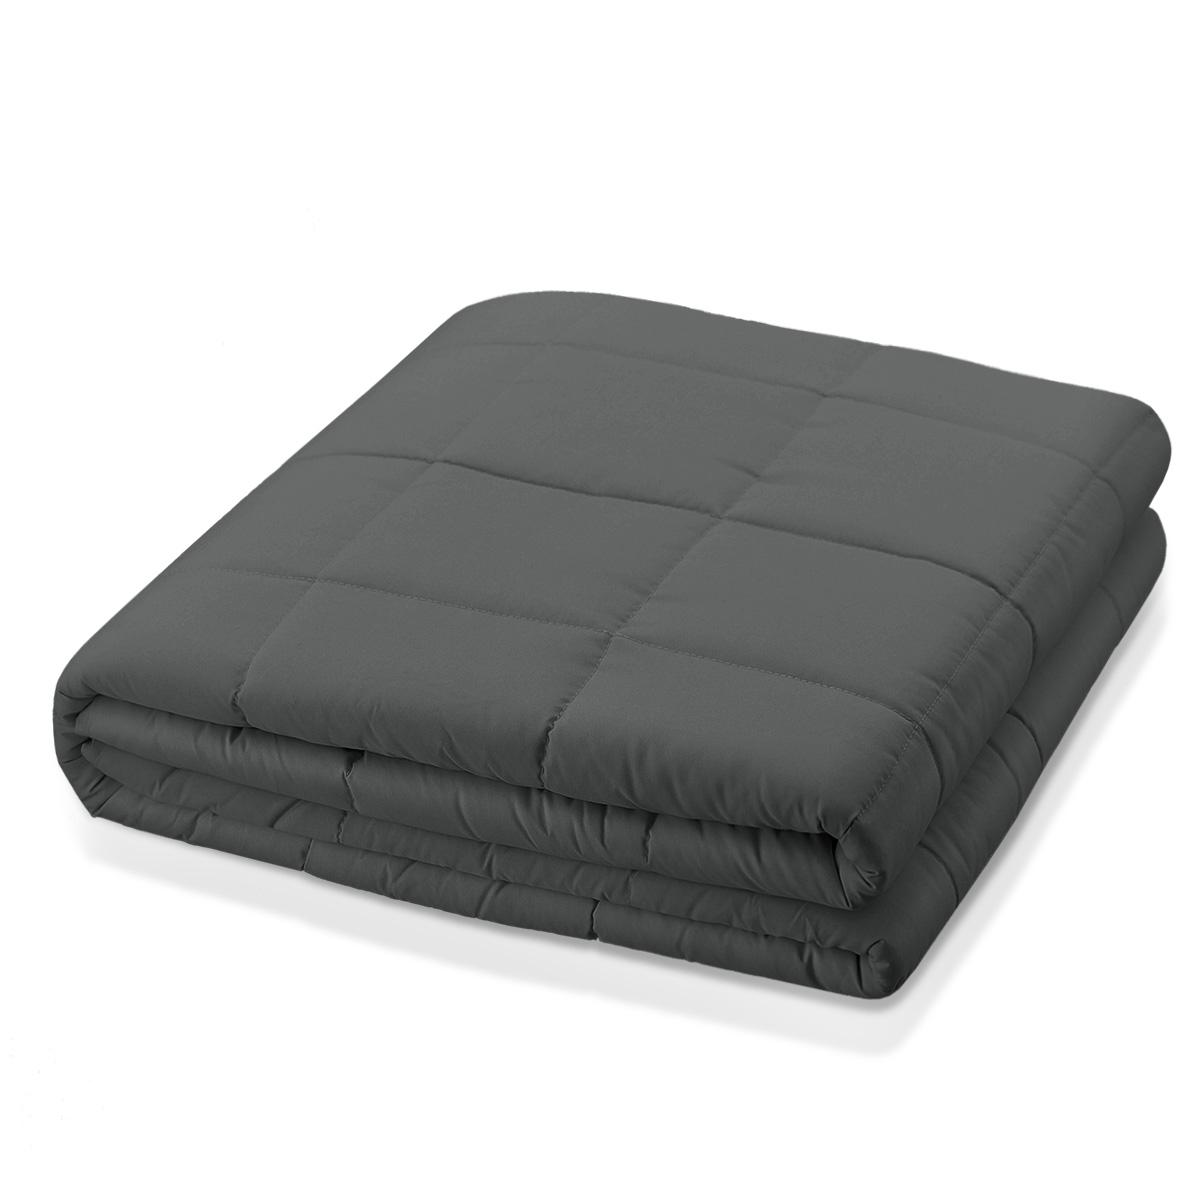 6.8kg/9kg Weighted Cotton Blanket For Adult, Full and Queen Size Cover